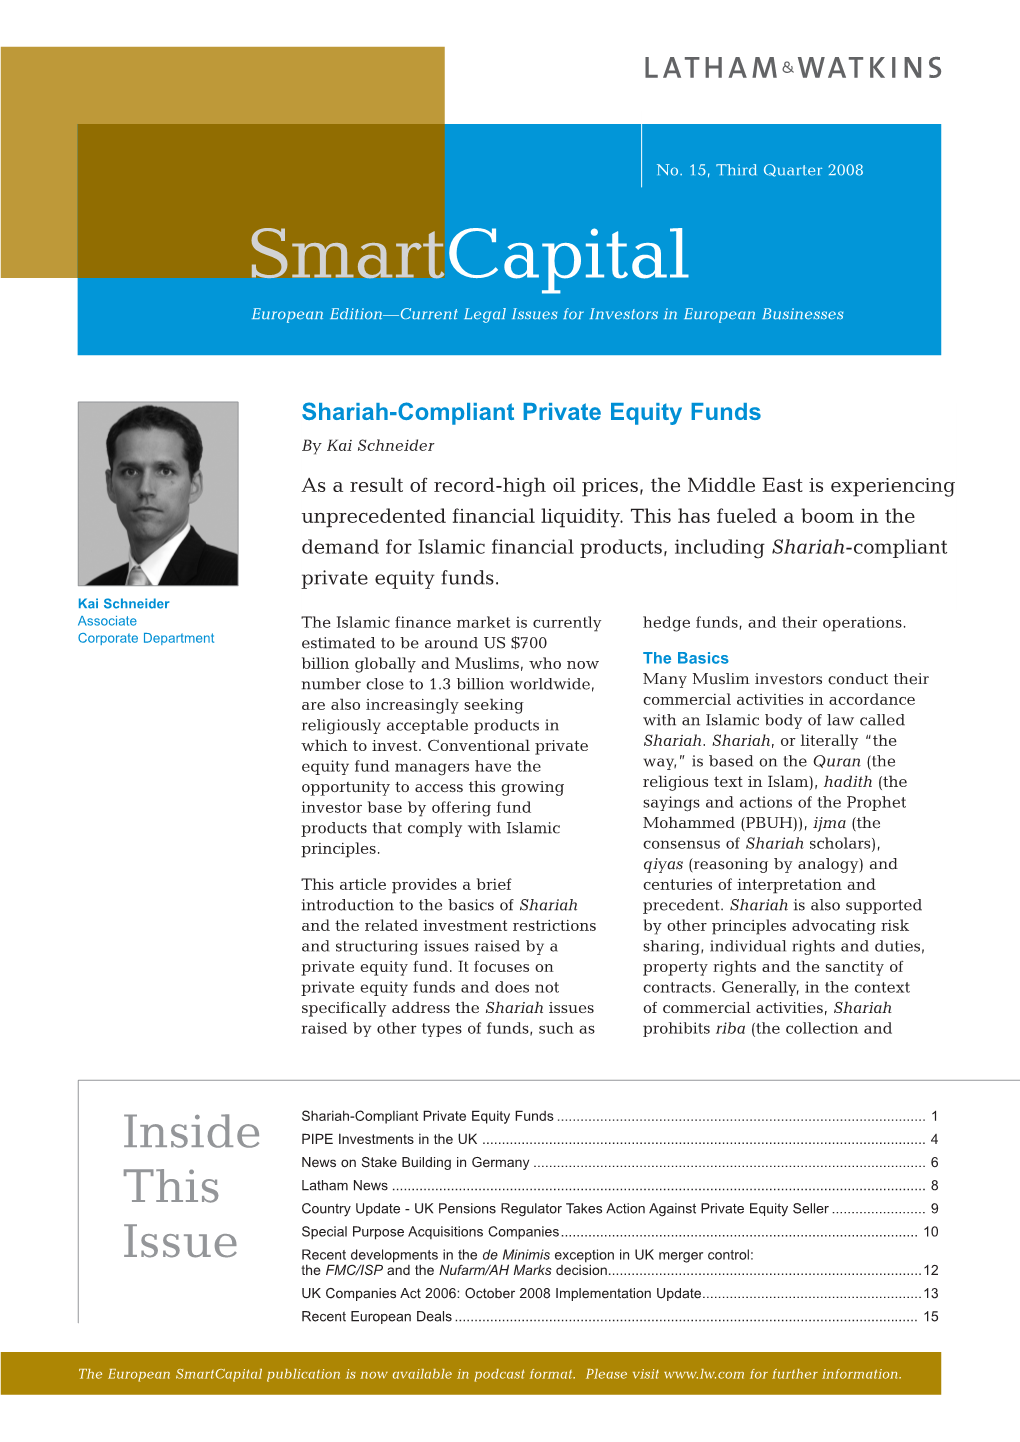 Smartcapital European Edition—Current Legal Issues for Investors in European Businesses